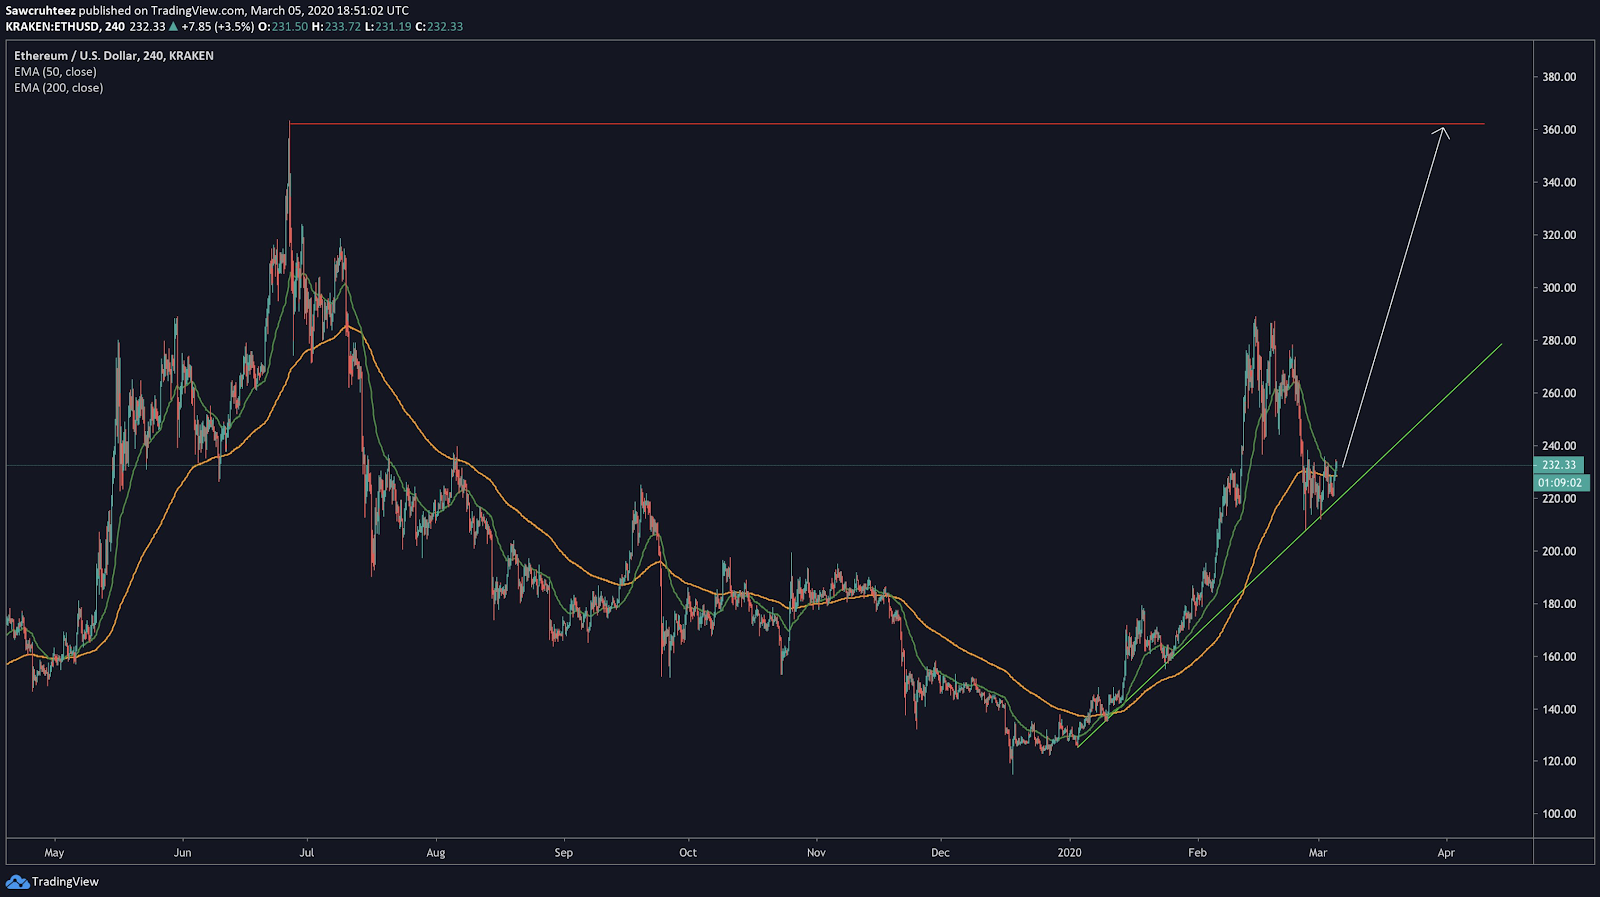 Ethereum / USD price chart by TradingView